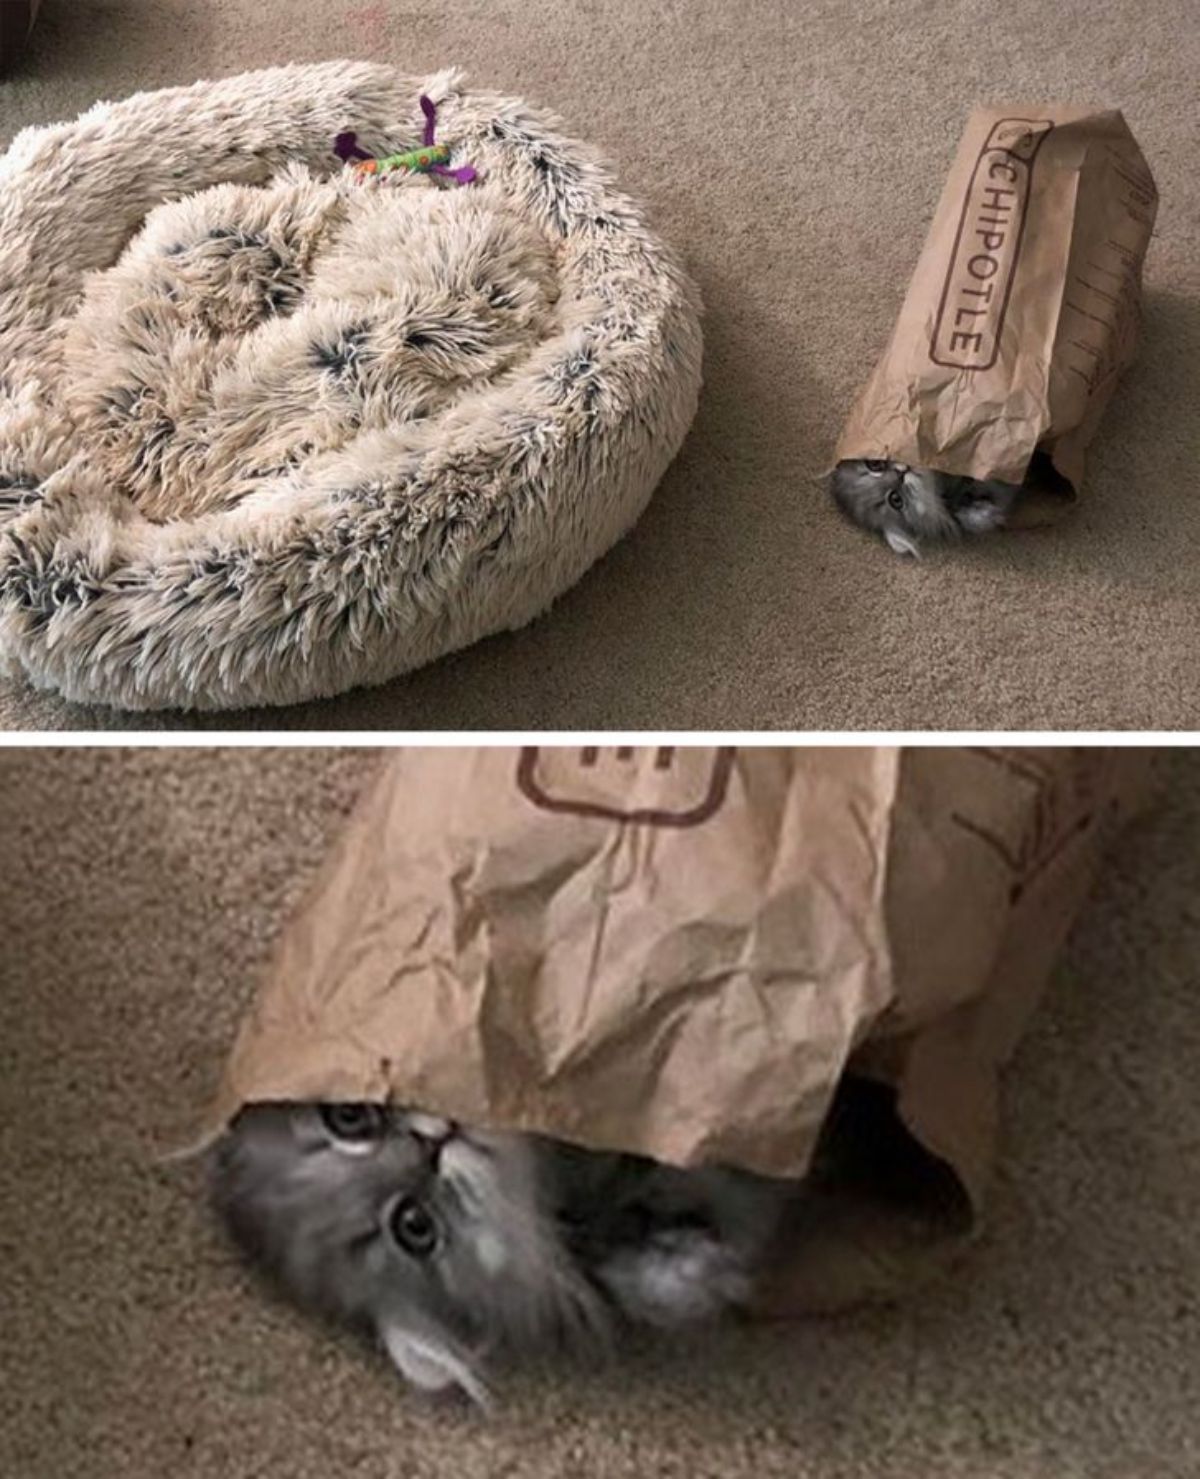 2 photos of a grey and white kitten inside a brown paper bag on the floor next to a white and black fluffy cat bed